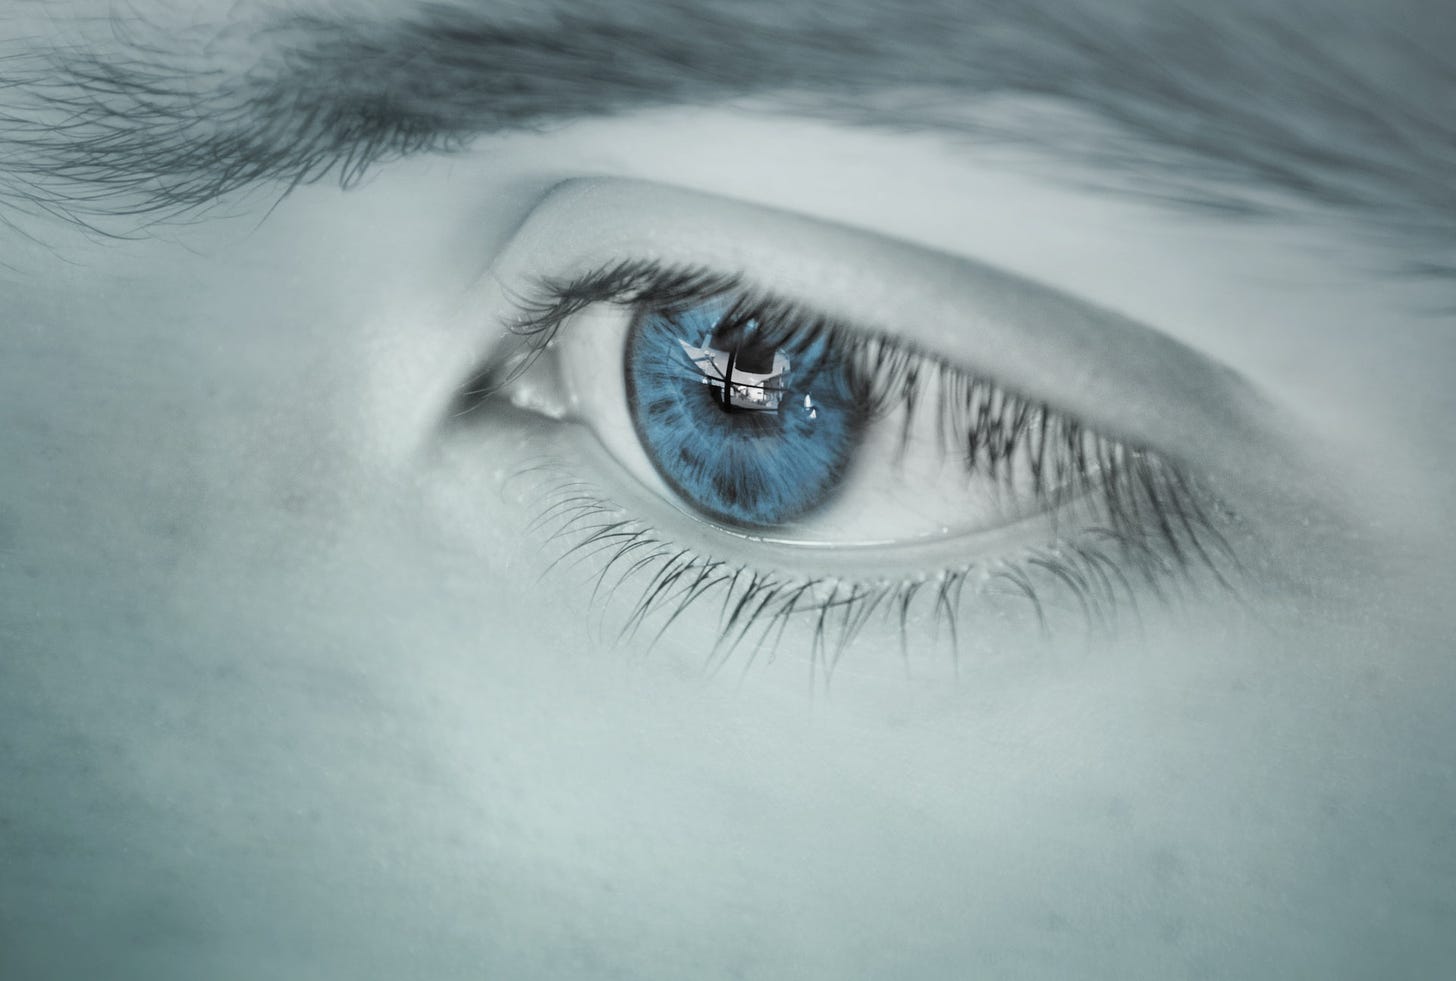 Photo by Magoi: https://www.pexels.com/photo/blue-eyed-pupil-wallpaper-281279/